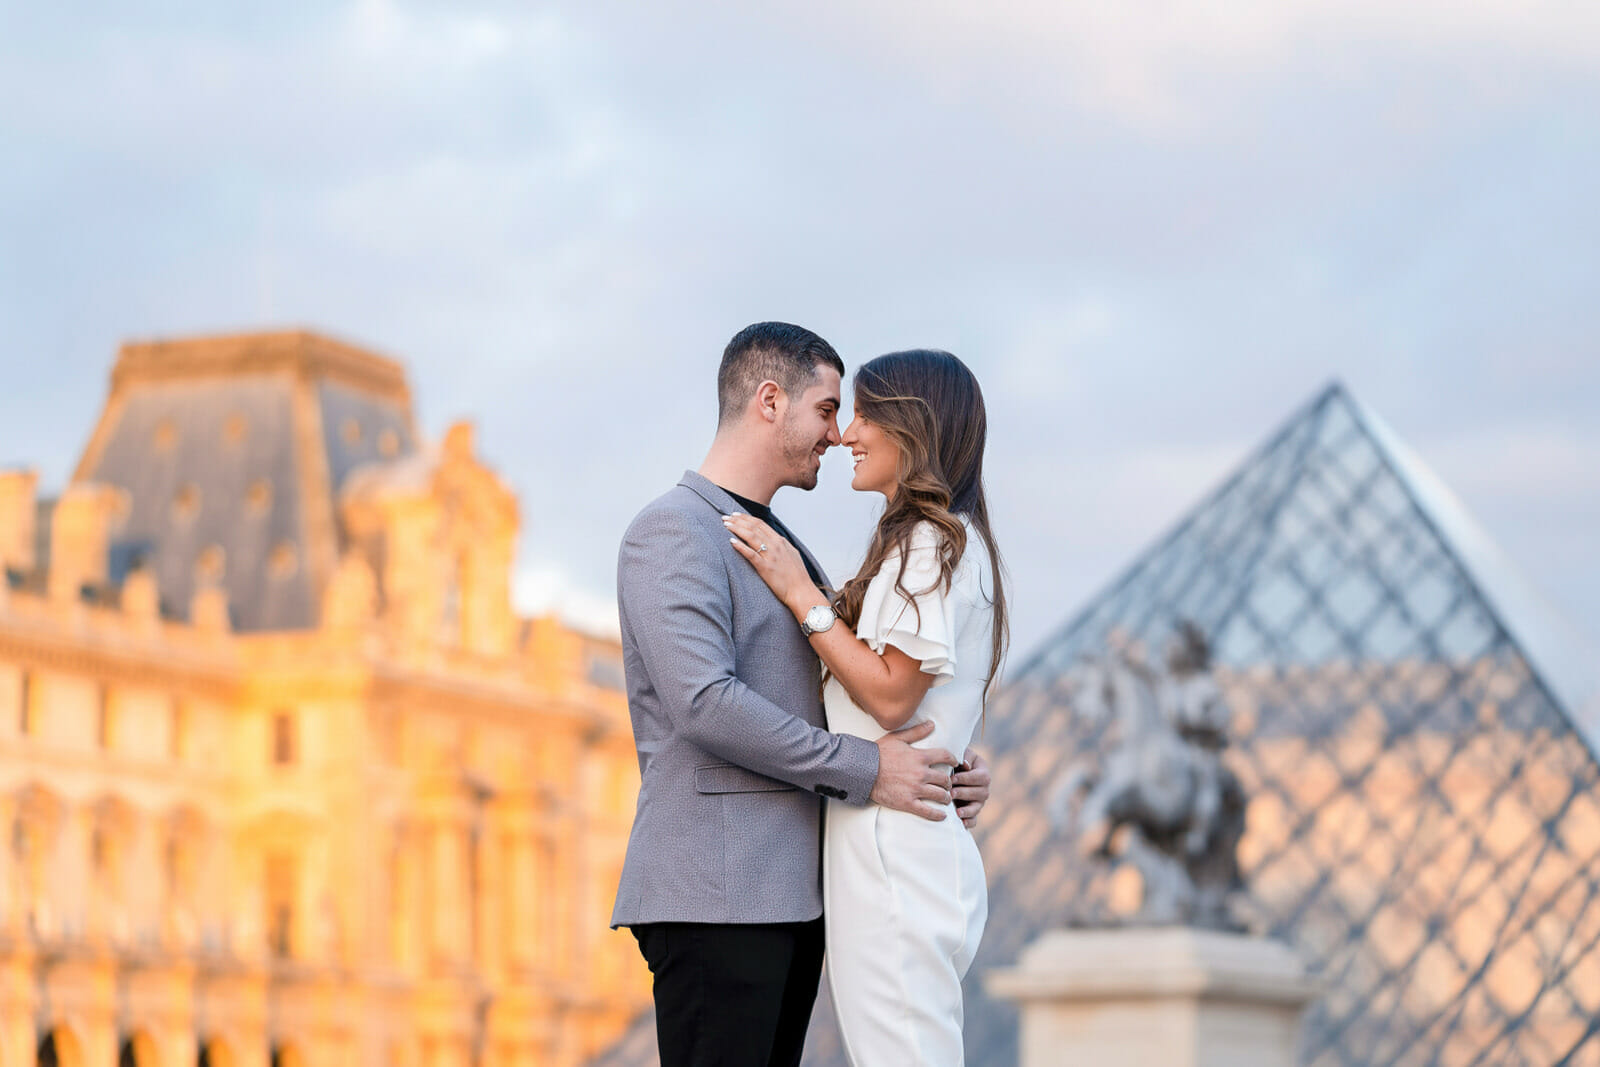 Unusual Paris couple photos at the Louvre Museum in the evening